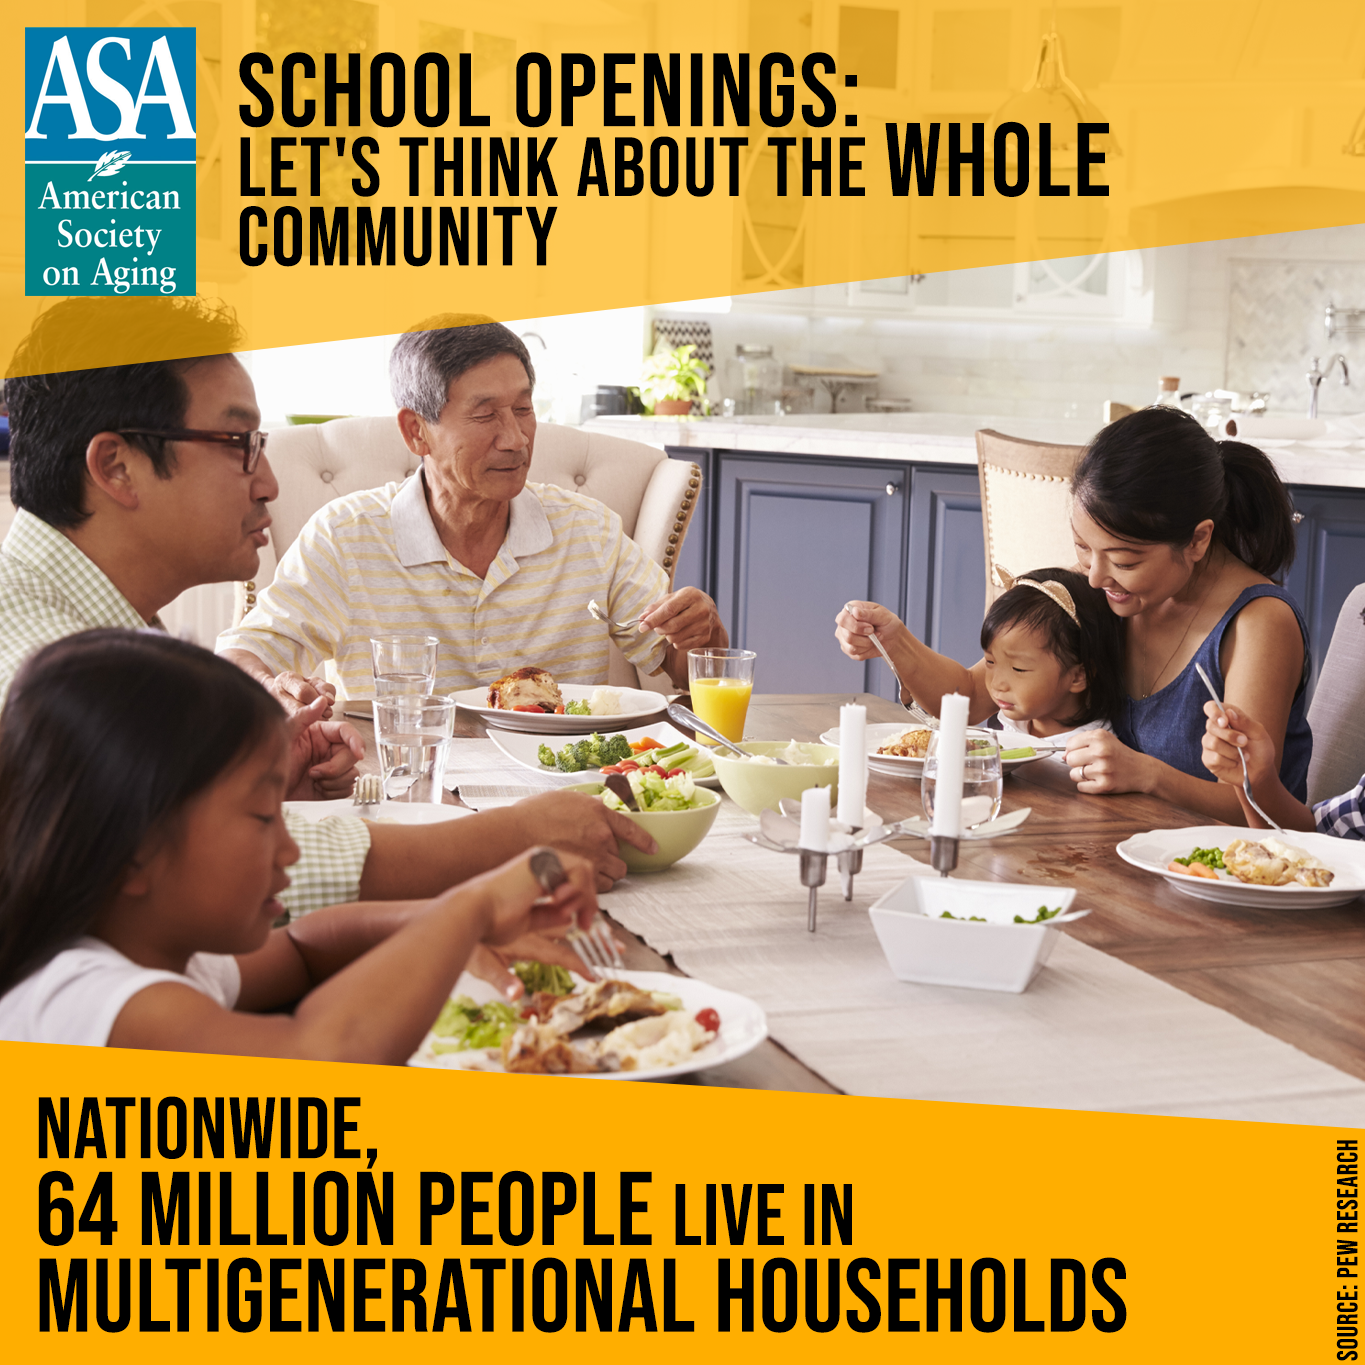 School Openings: Let's think about the whole community. 64 million people live in multigenerational households in the U.S.